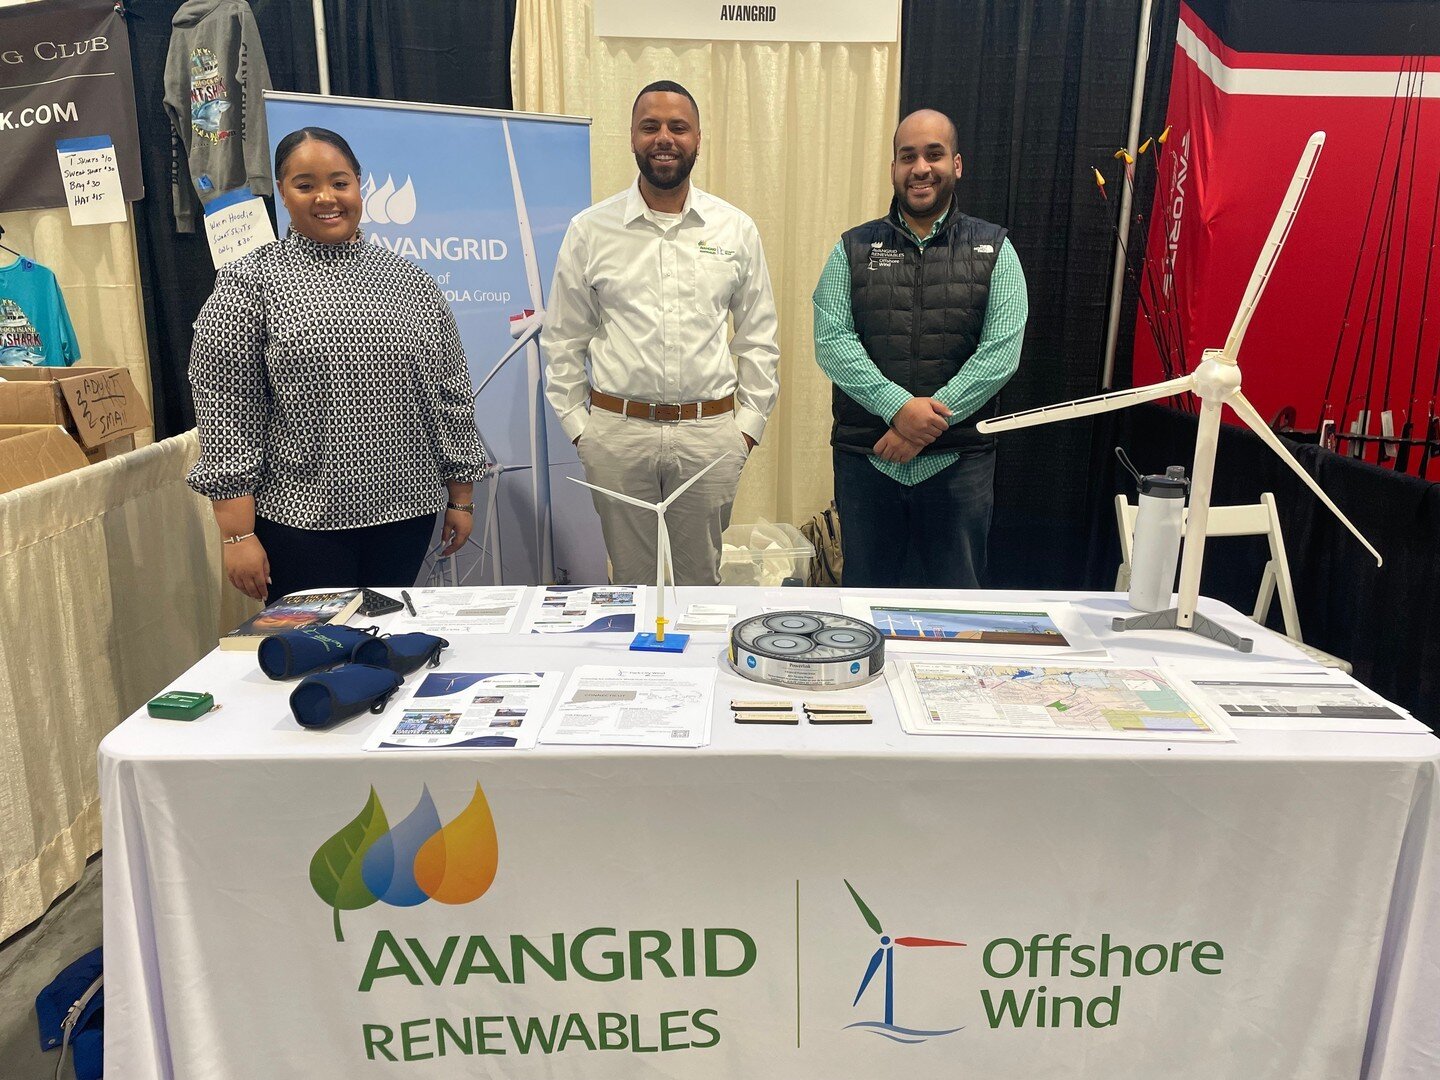 We had a great time this weekend at the Connecticut Fishing and Outdoor Show! #Connecticut #Fishing #Outdoors